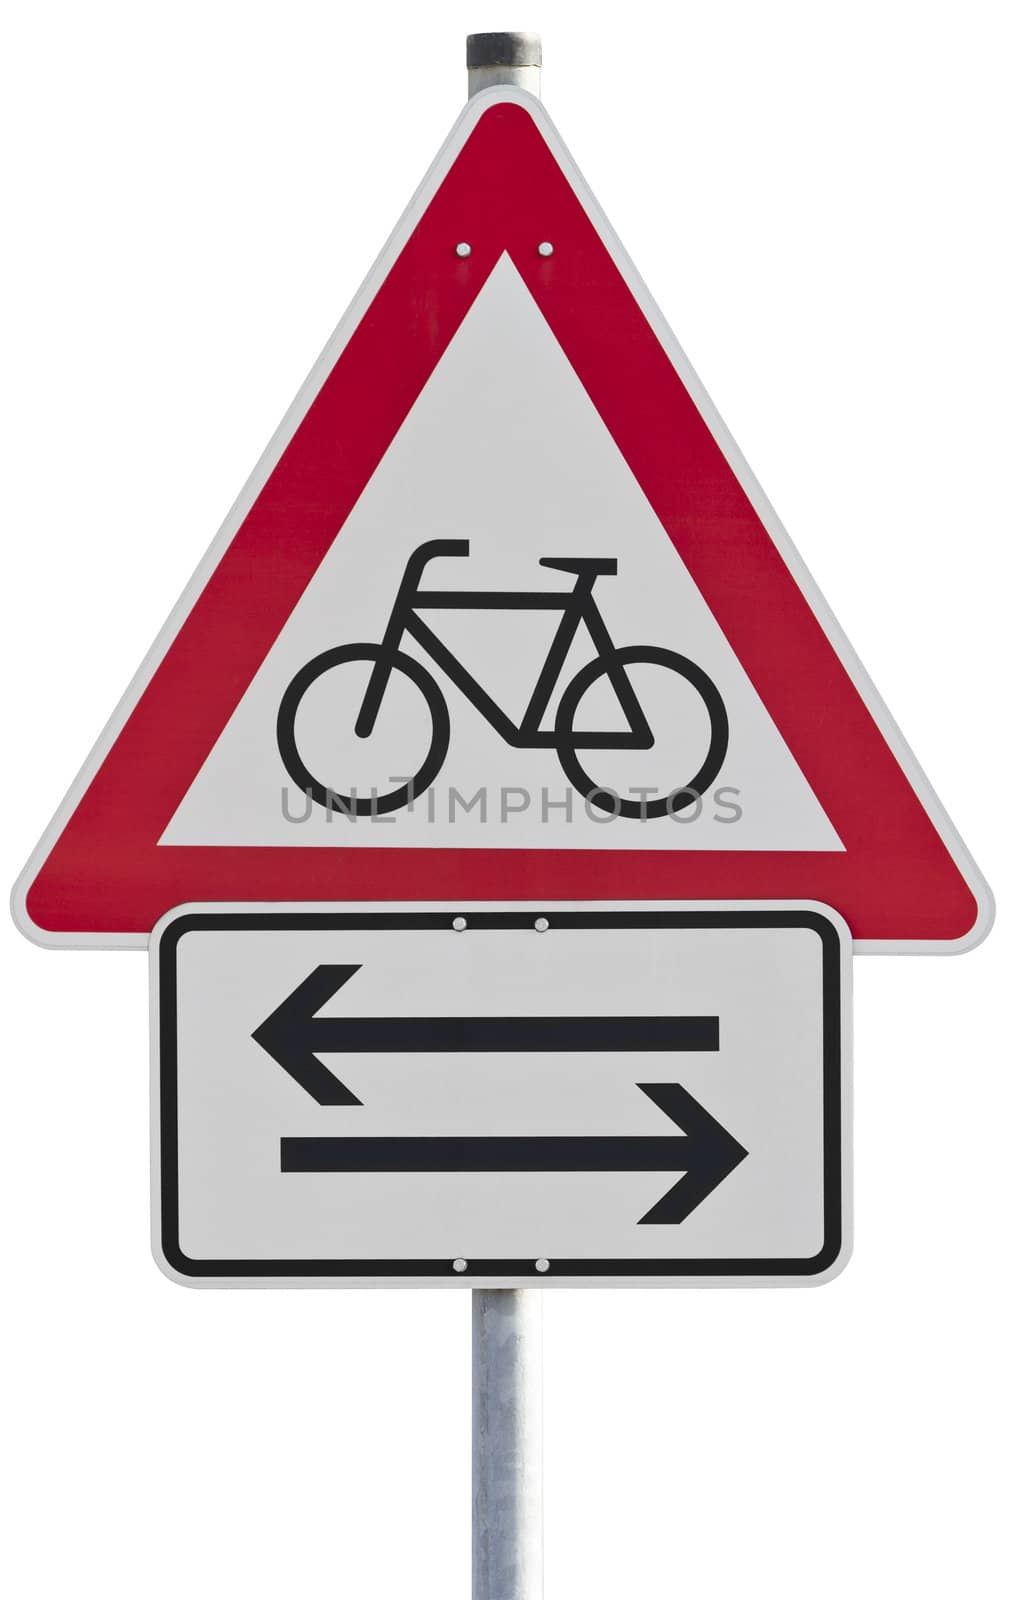 bicycles crossing - traffic sign  (clipping path included) by gewoldi